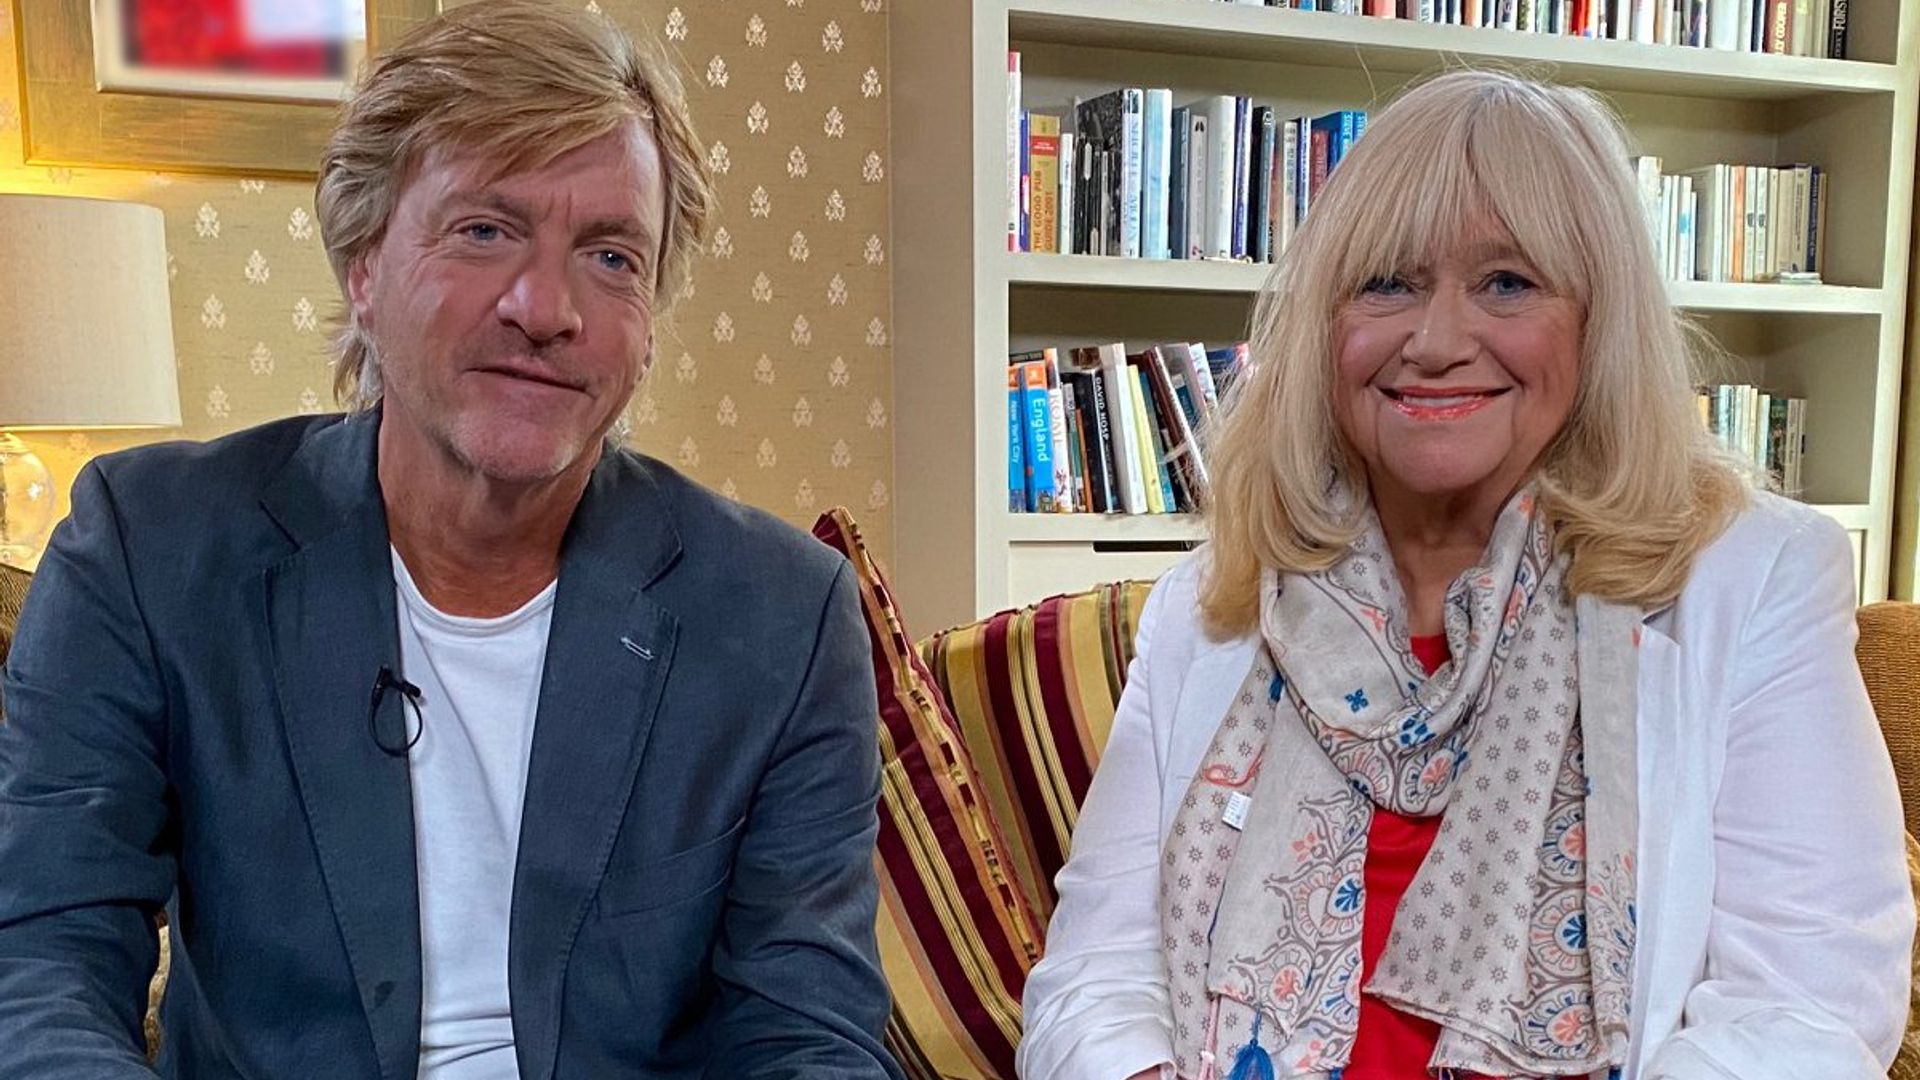 Richard Madeley reveals the one thing wife Judy hates about being on camera